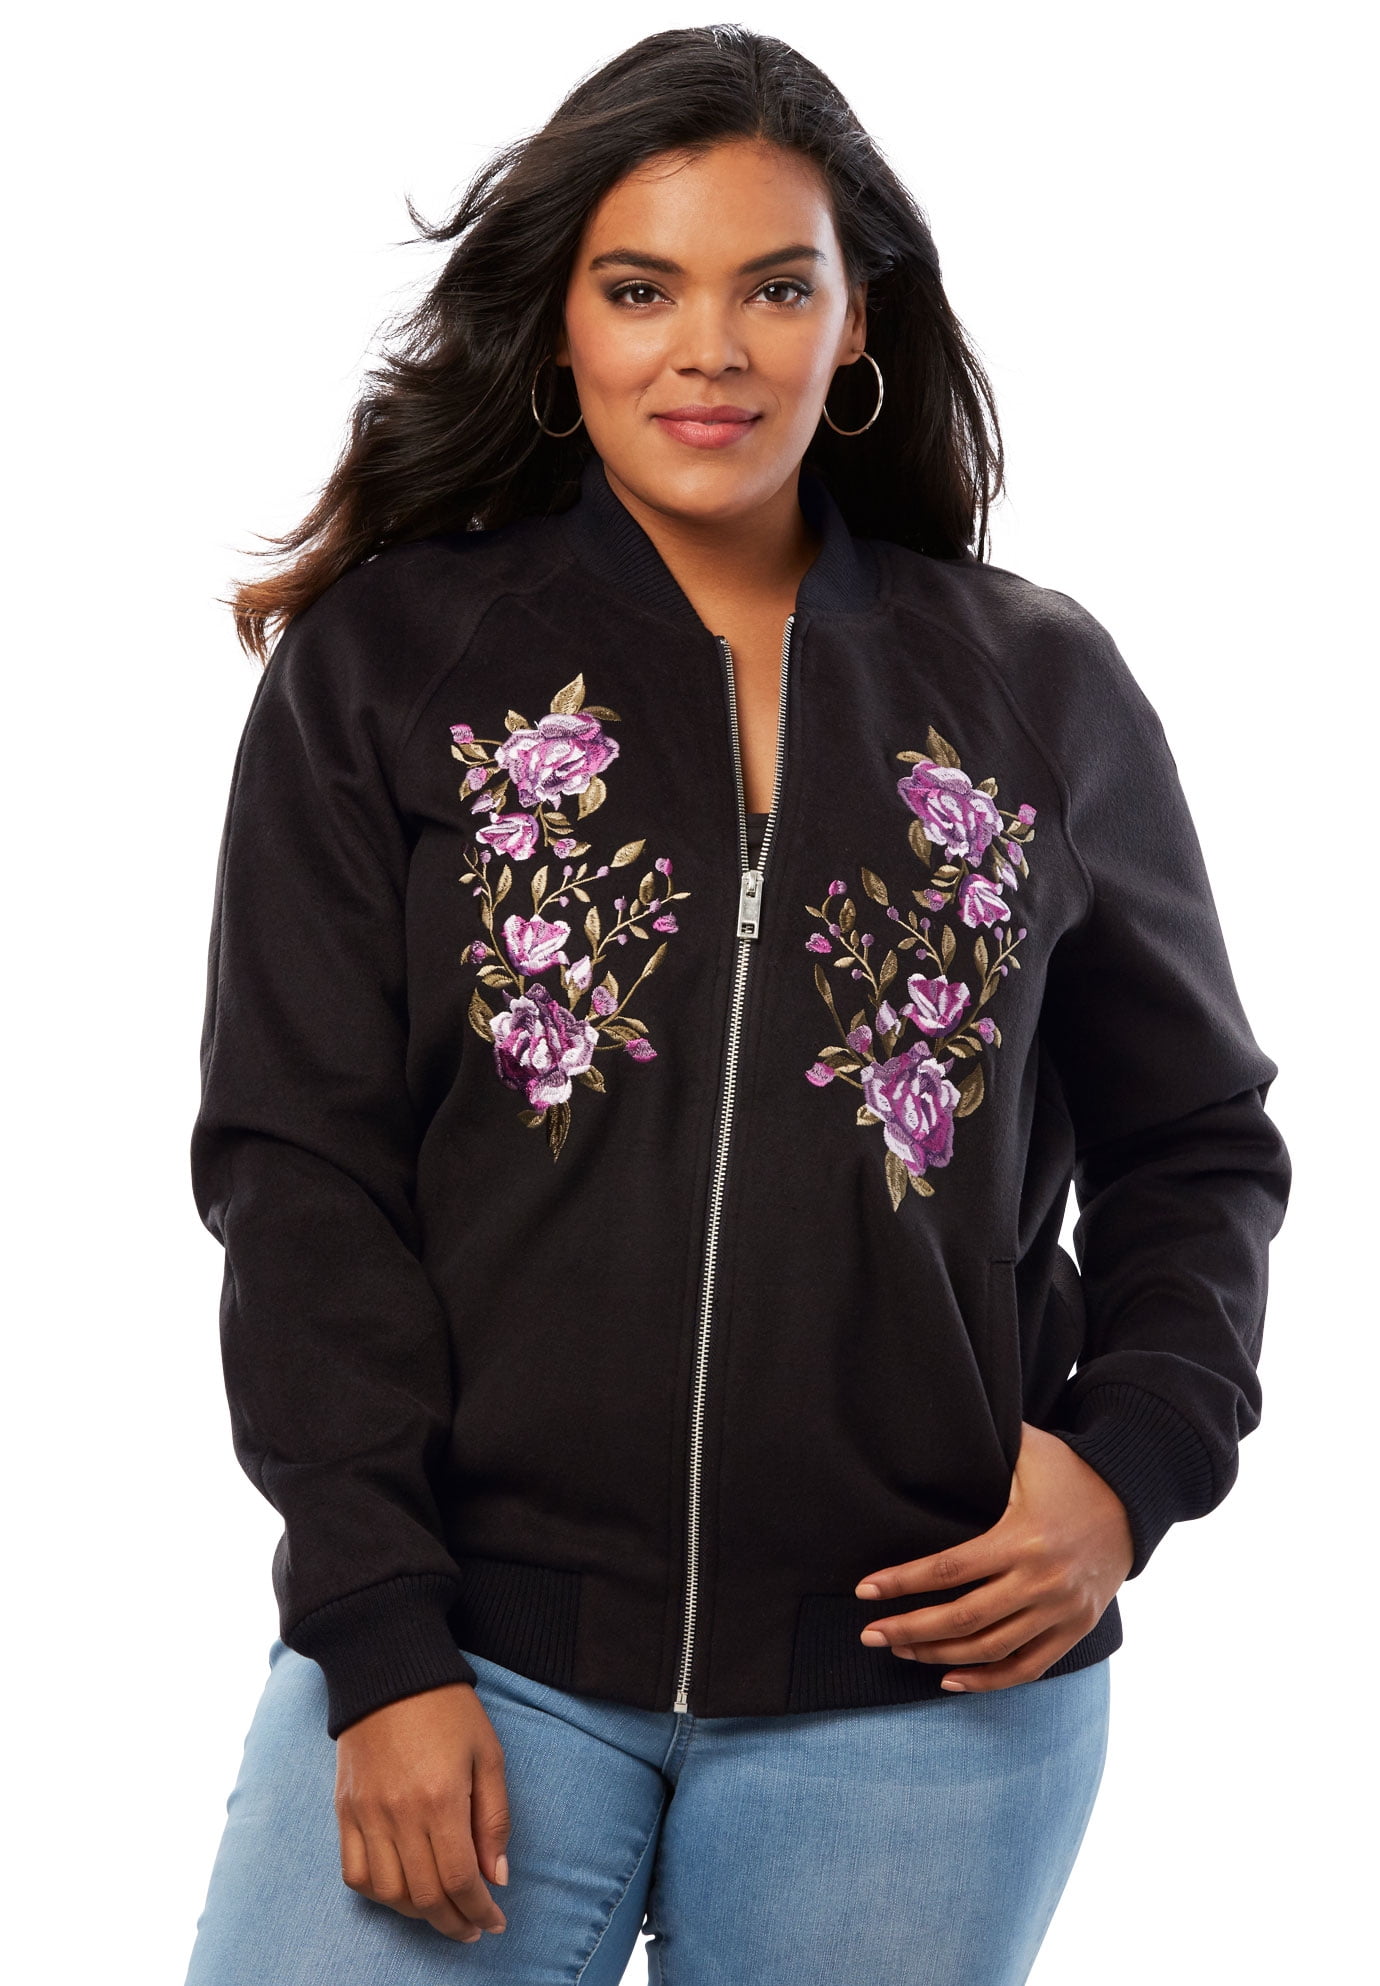 LADIES WOMENS FLOWER EMBROIDERED BOMBER JACKET PLUS SIZE 14 16 18 20 22 24 26 28